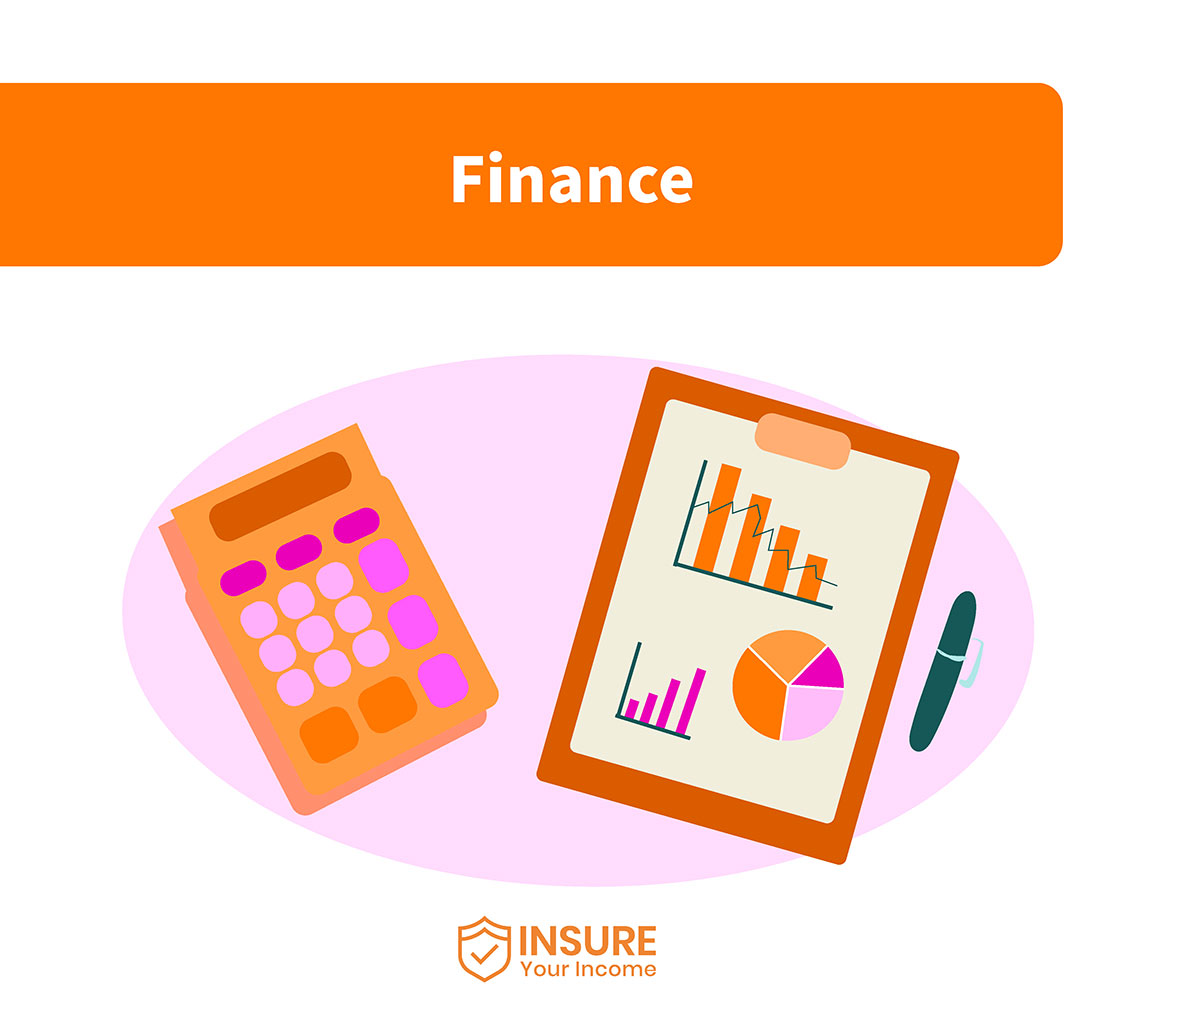 insure your income for Finance